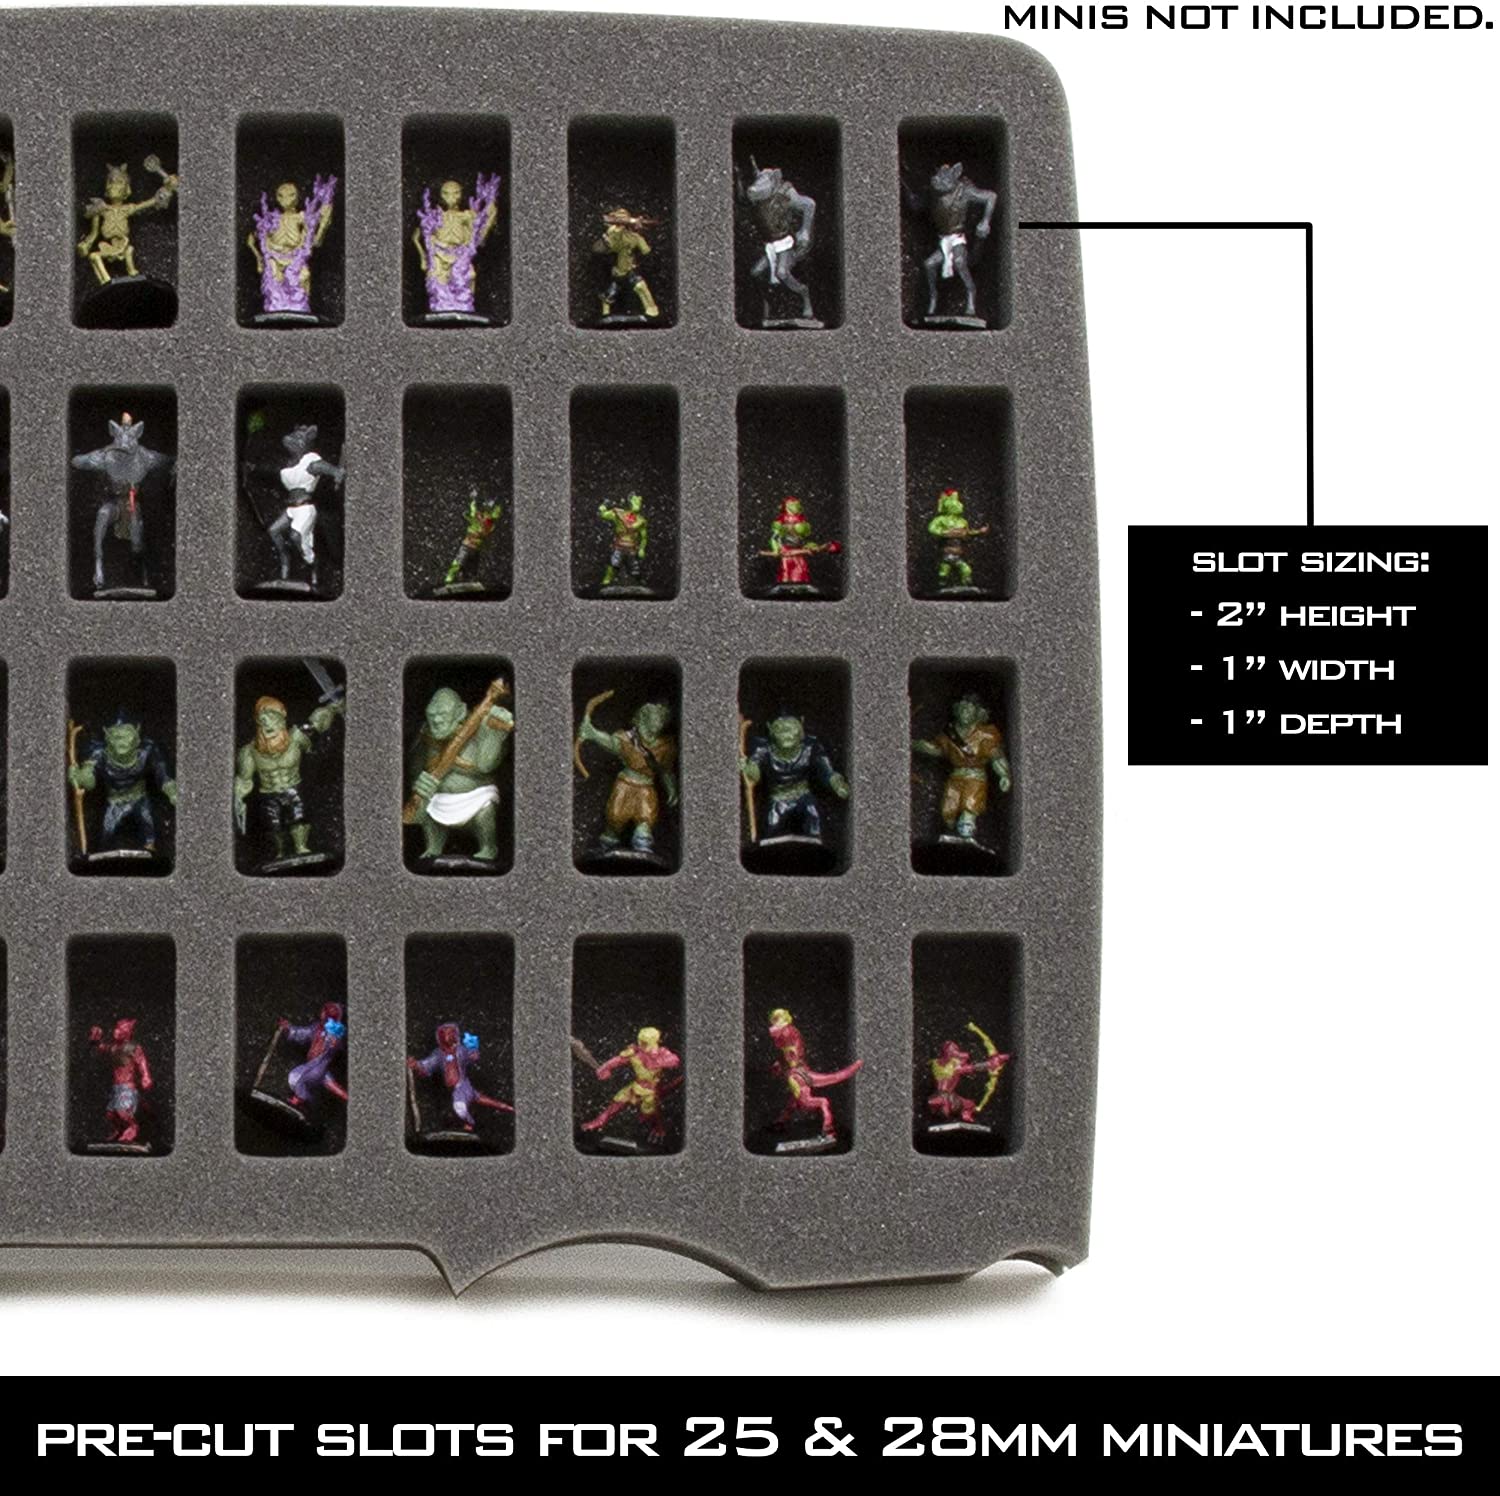  CASEMATIX Miniature Storage Hard Shell Figure Case - 30 Slot  Figurine Minature Carrying Case with Adjustable Strap and Accessory Storage  Compatible with Warhammer 40k, DnD and More! : Toys & Games